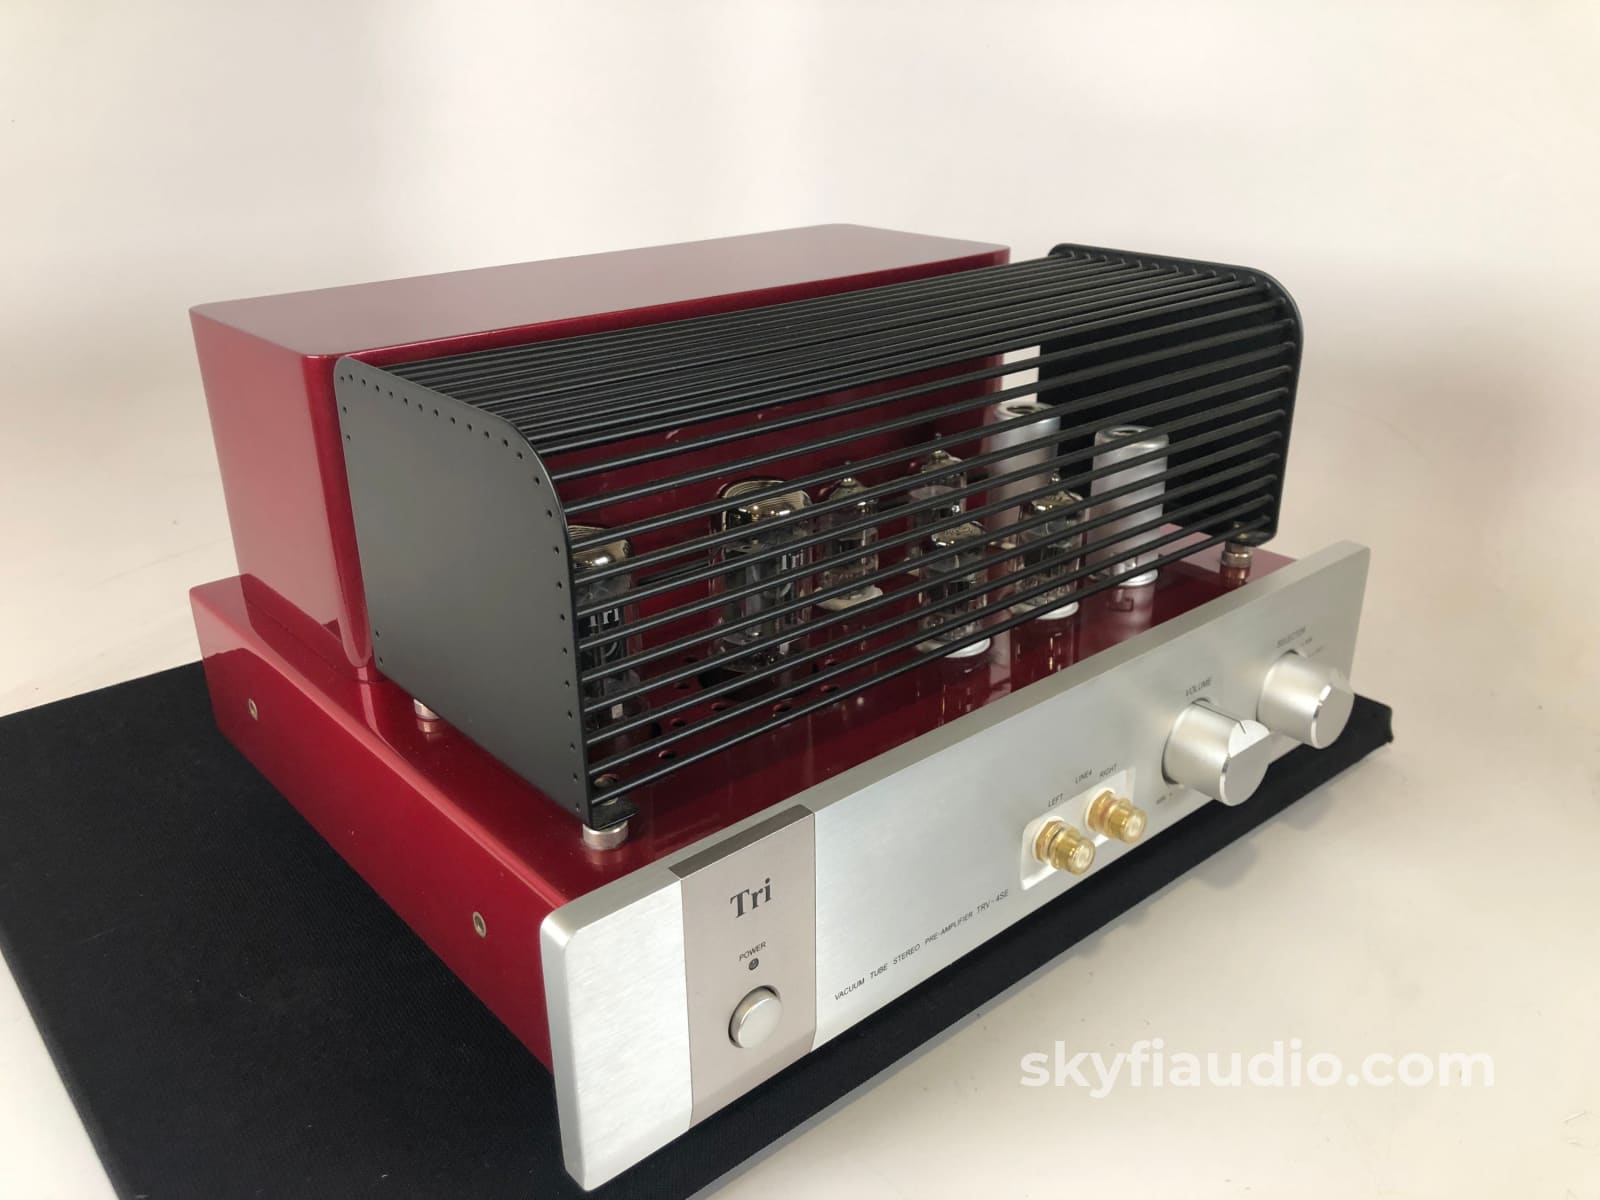 Triode Trv-4Se Tube Stereo Preamplifier With Phono Input